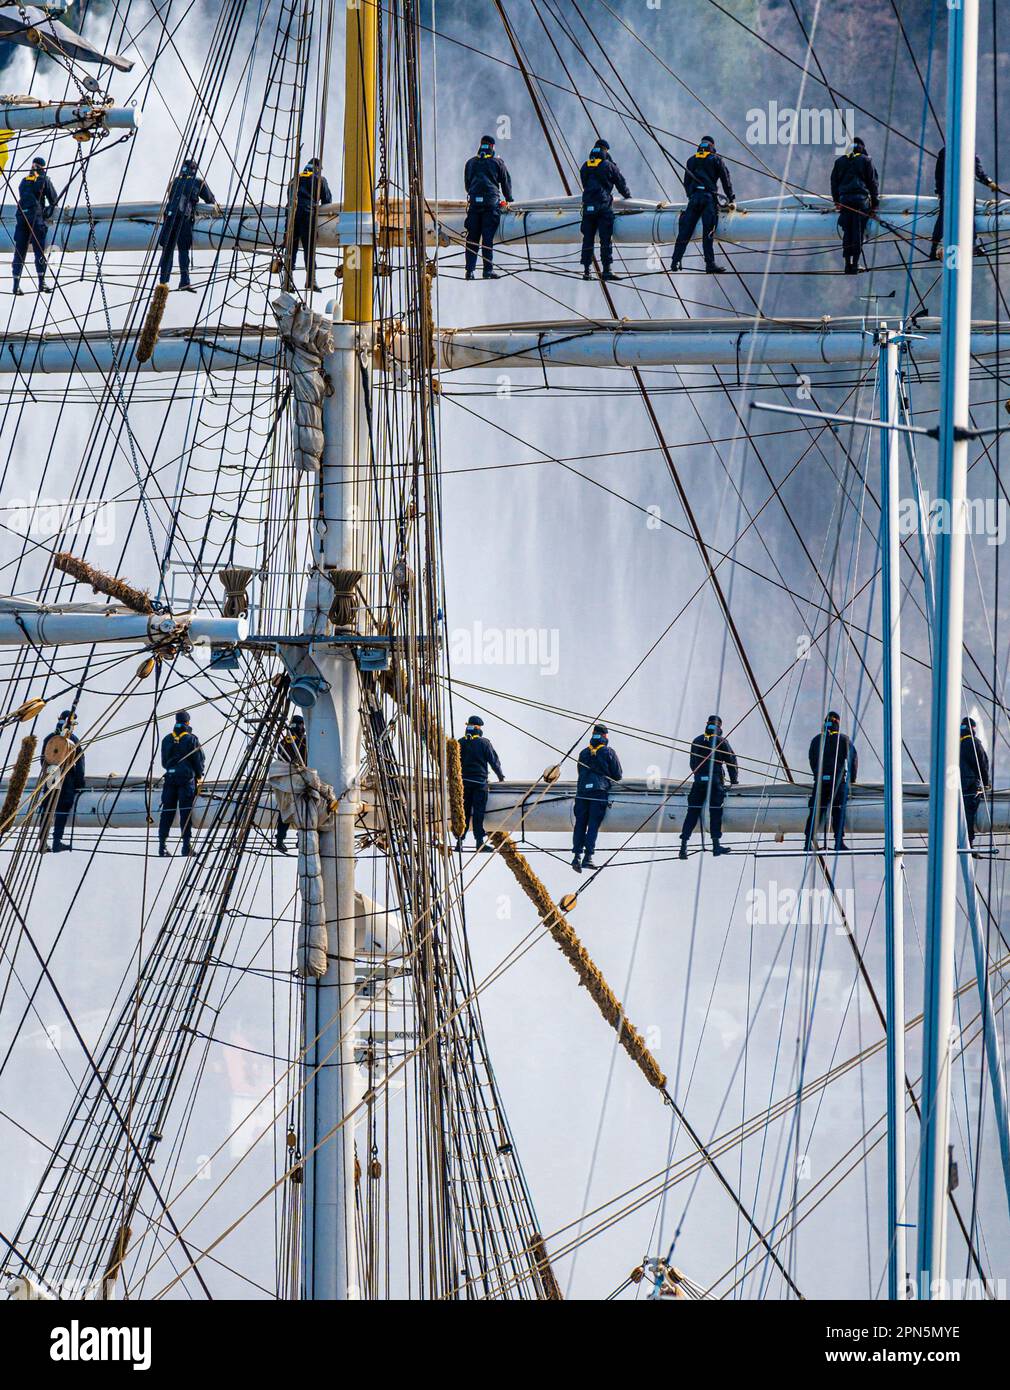 The Statsraad Lehmkuhl coming home to Bergen after 20 months at sea around the world. Stock Photo